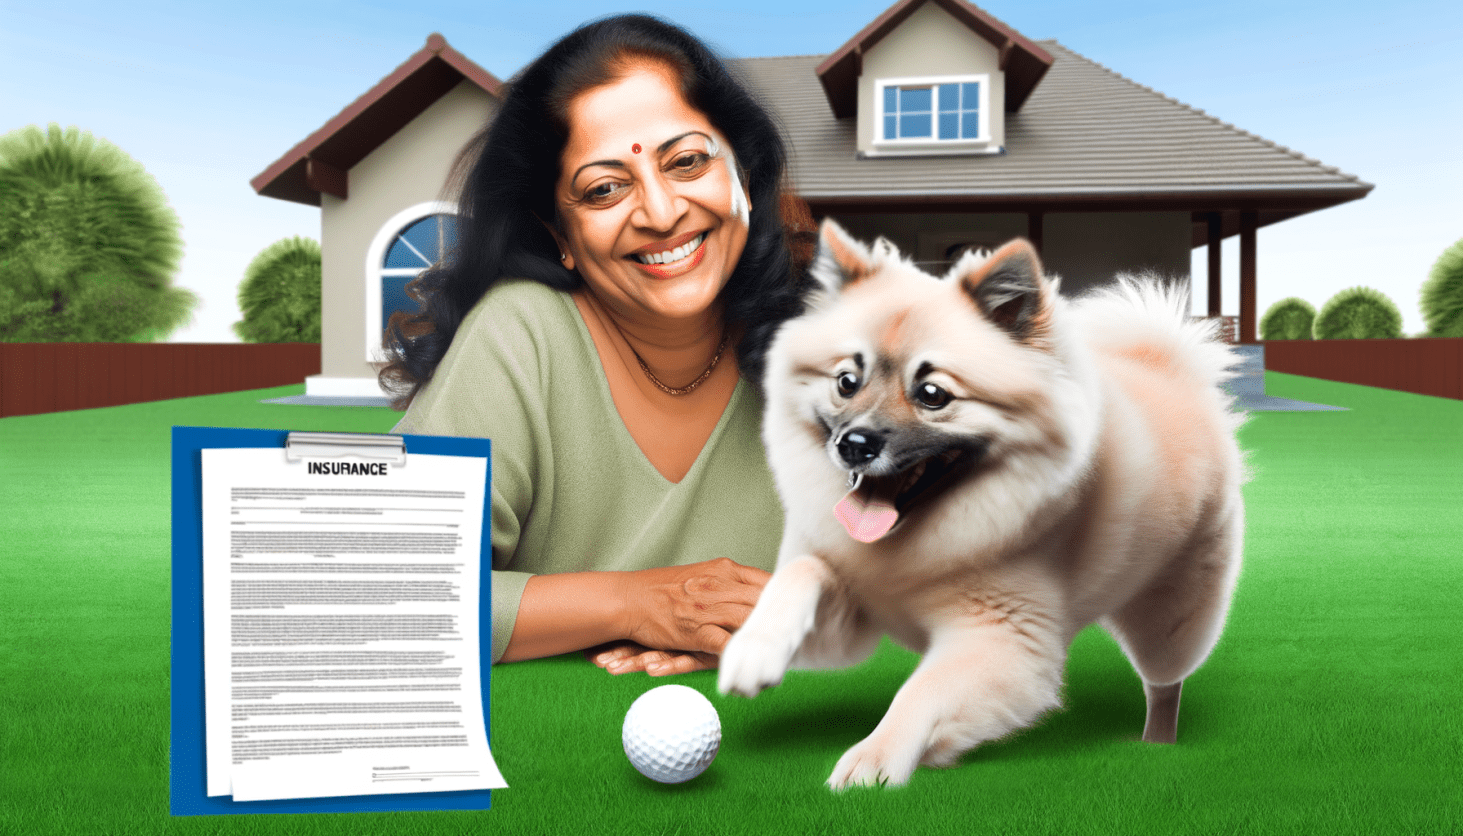 A happy pet owner and their pet, symbolizing security with the right insurance.